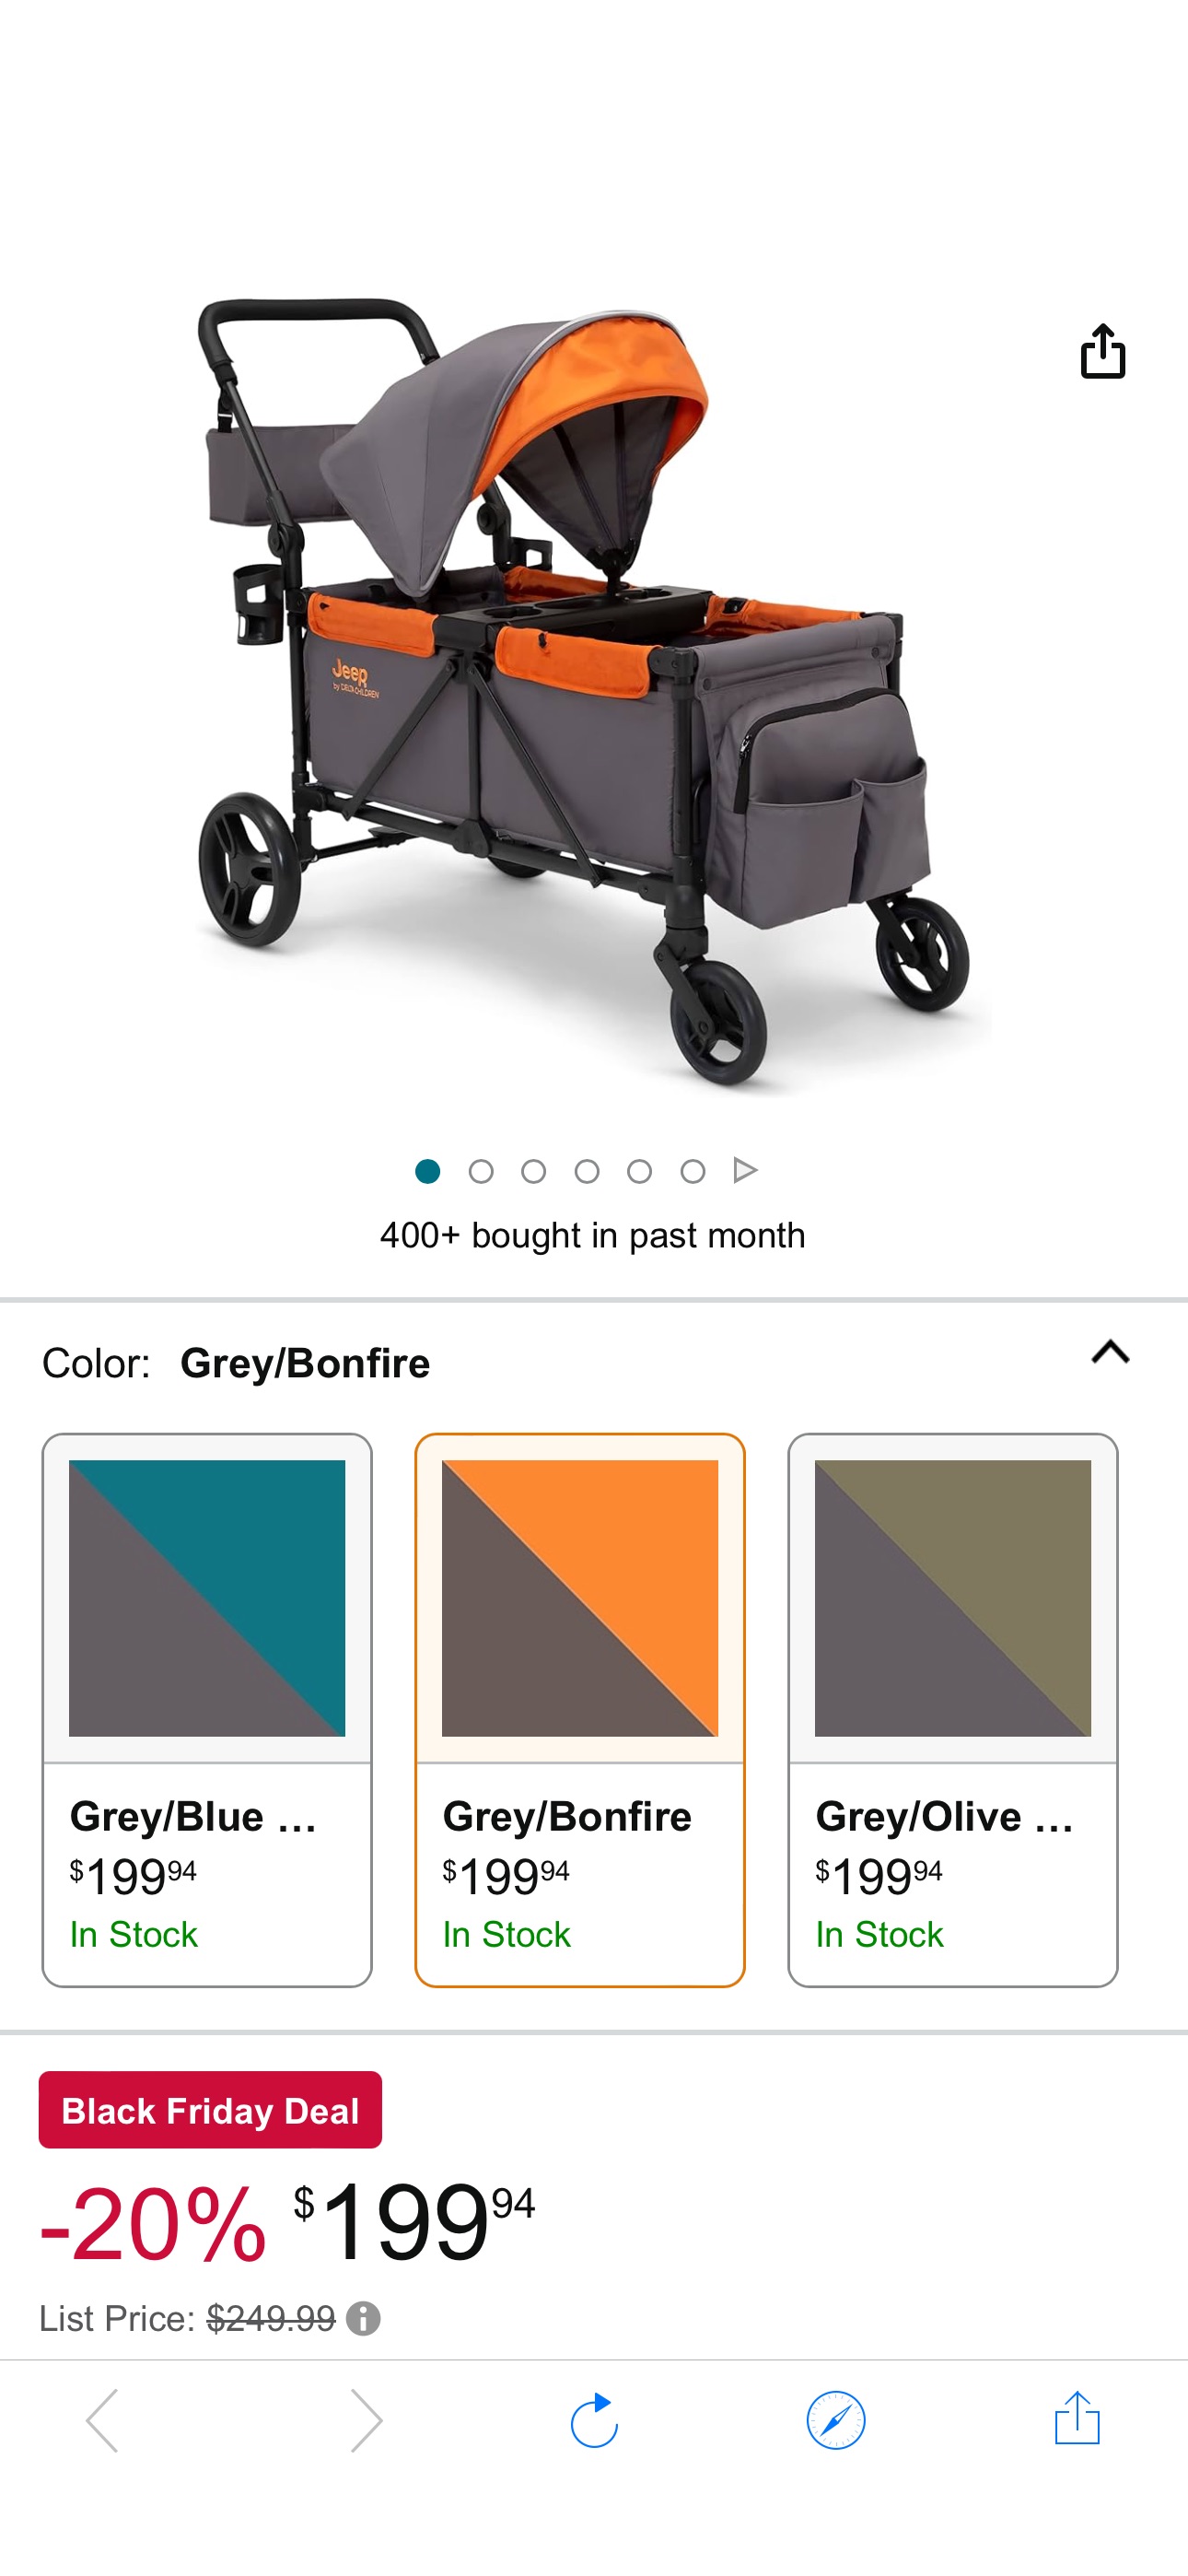 Amazon.com : Jeep Sport All-Terrain Stroller Wagon by Delta Children - Includes Canopy, Parent Organizer, Adjustable Handlebar, Snack Tray & Cup Holders, Grey/Bonfire : Baby